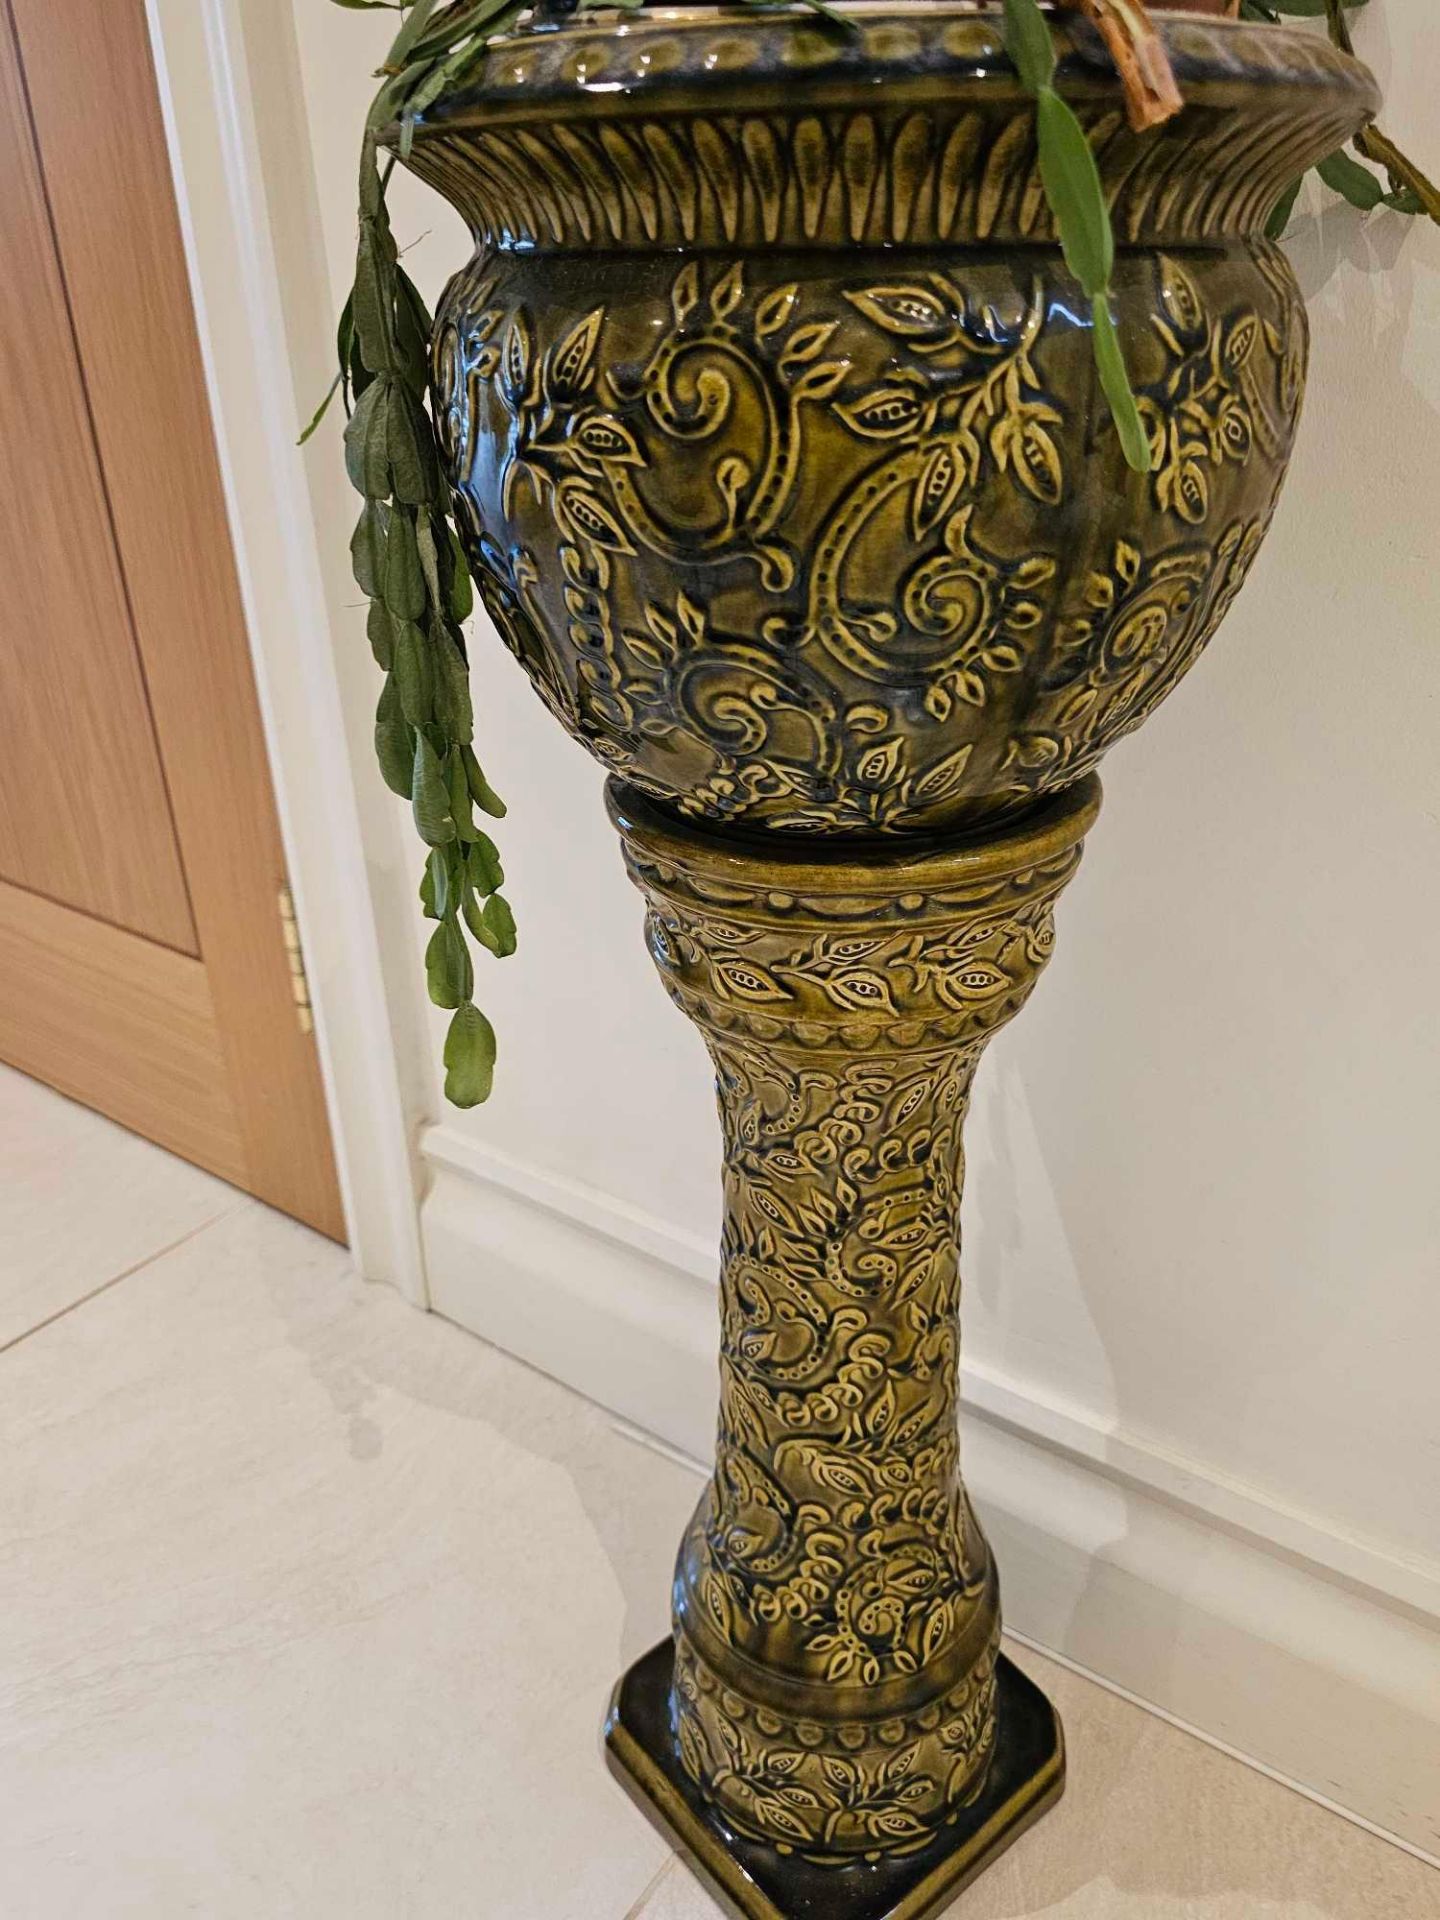 An Edwardian Majolica JardiniÃ¨re And Pedestal Stand Glazed With Foliate Motifs In Relief 28 X 72cm - Image 3 of 3